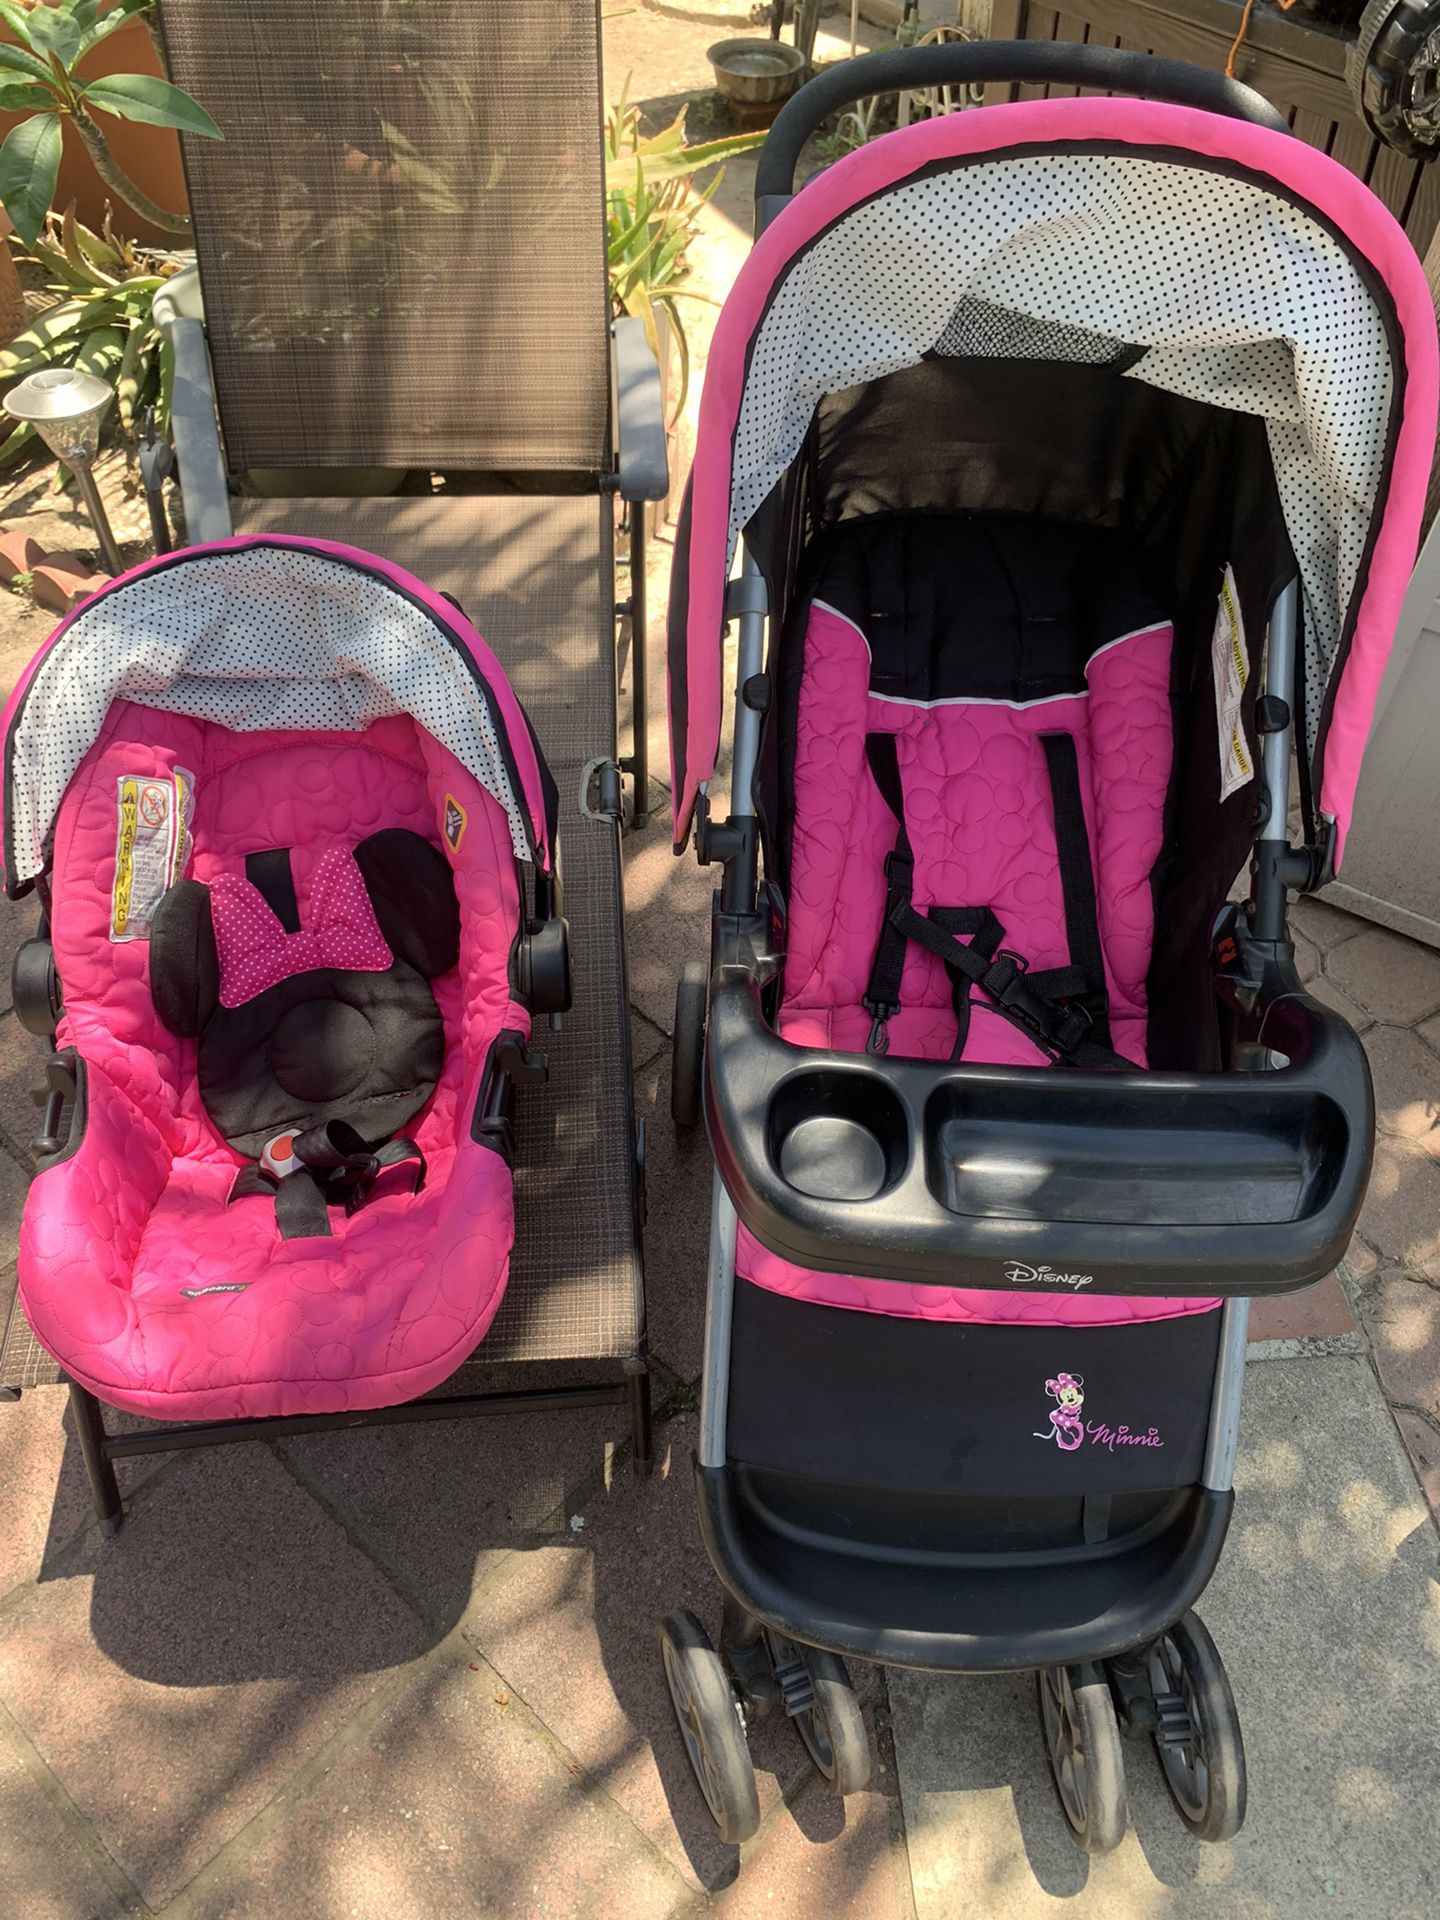 Stroller and Car Seat. “ Mini Mouse “